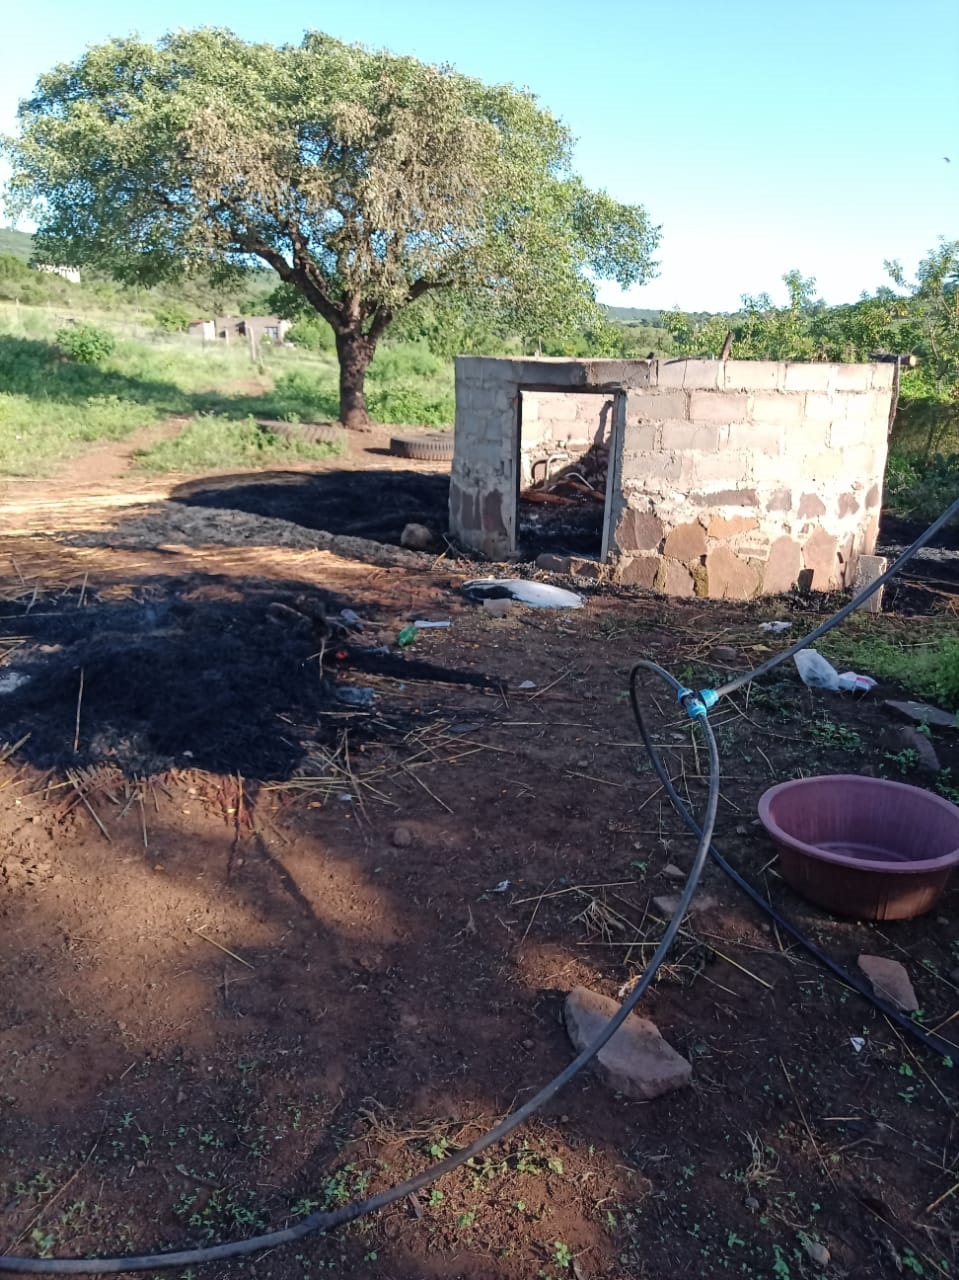 The rondavel that was set alight by villagers.